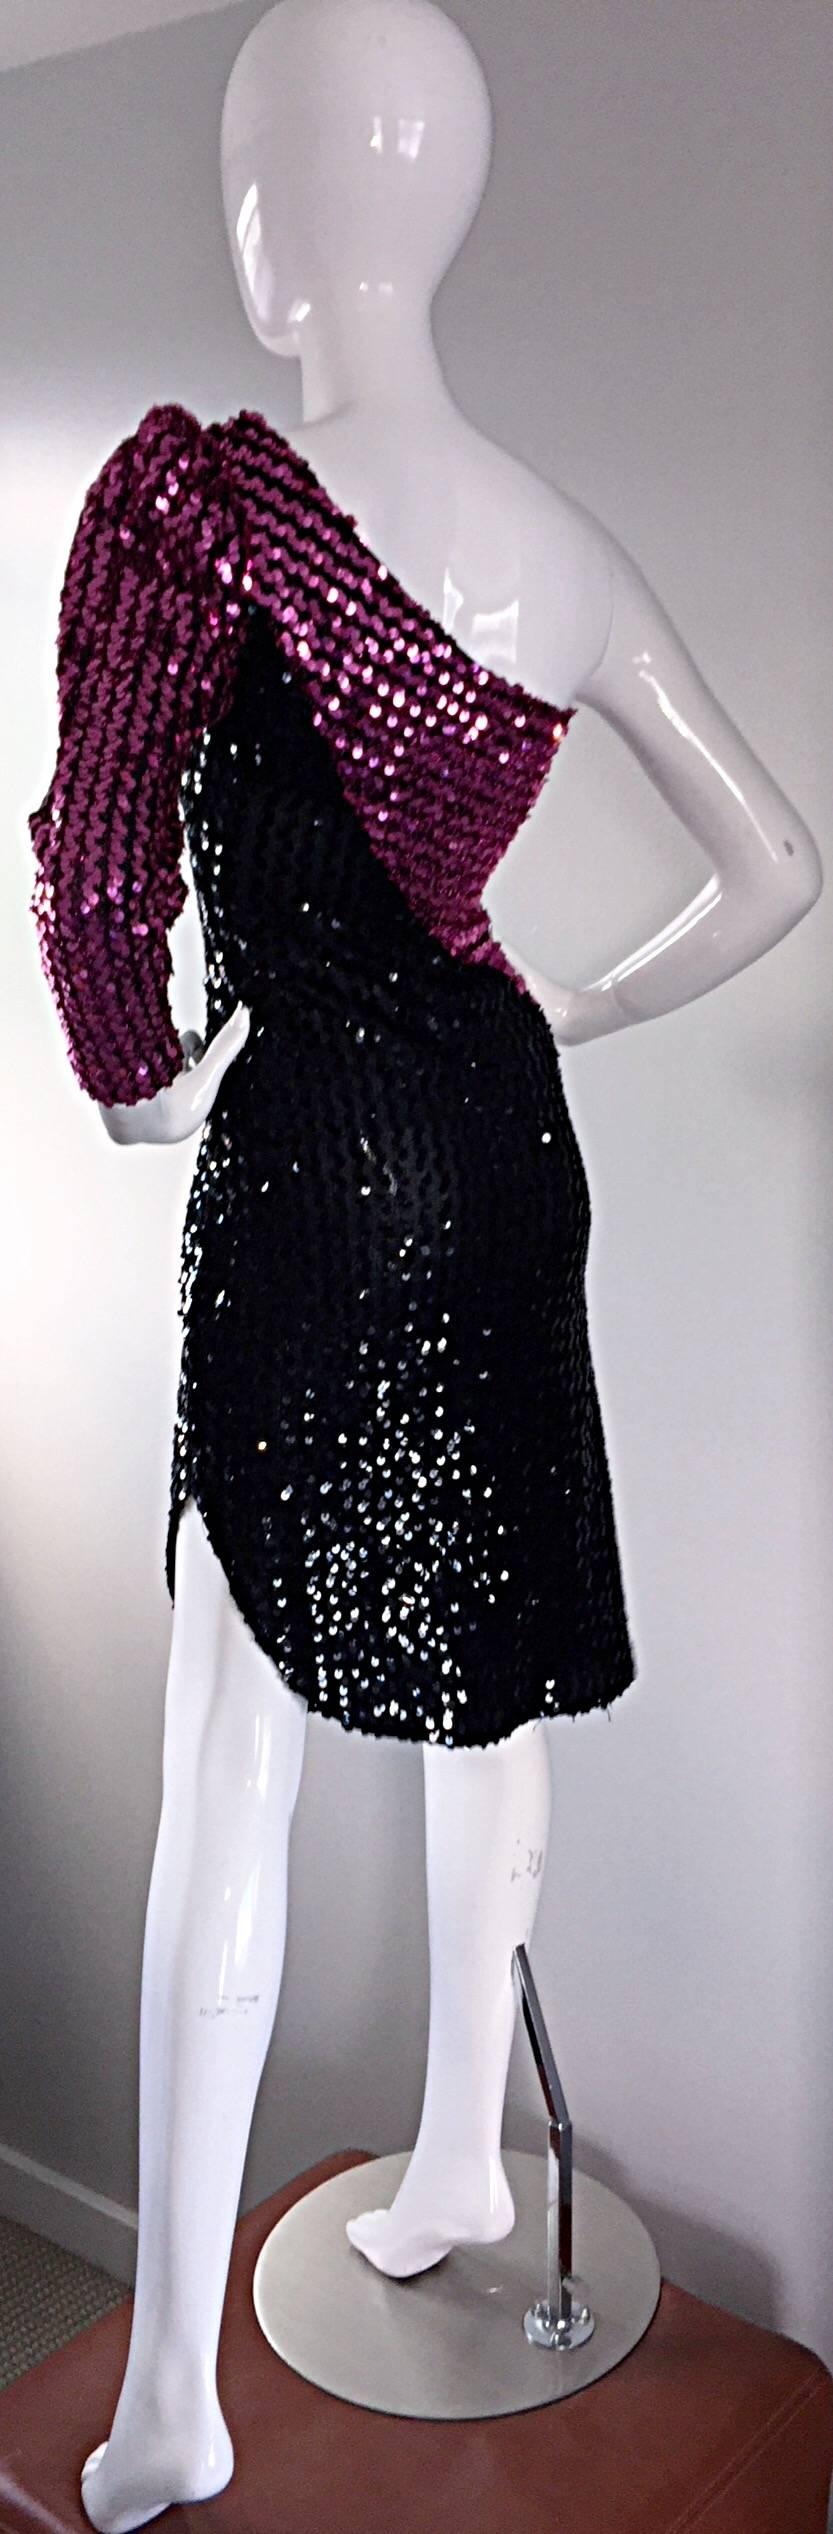 Incredible 1970s disco Studio 54 vintage SAMIR sequined one shoulder dress! Allover black and pink sequins. Slightly raised hem on one side. Looks great alone, or belted. Definitely a statement worthy dress, that looks amazing on! Hidden zipper up